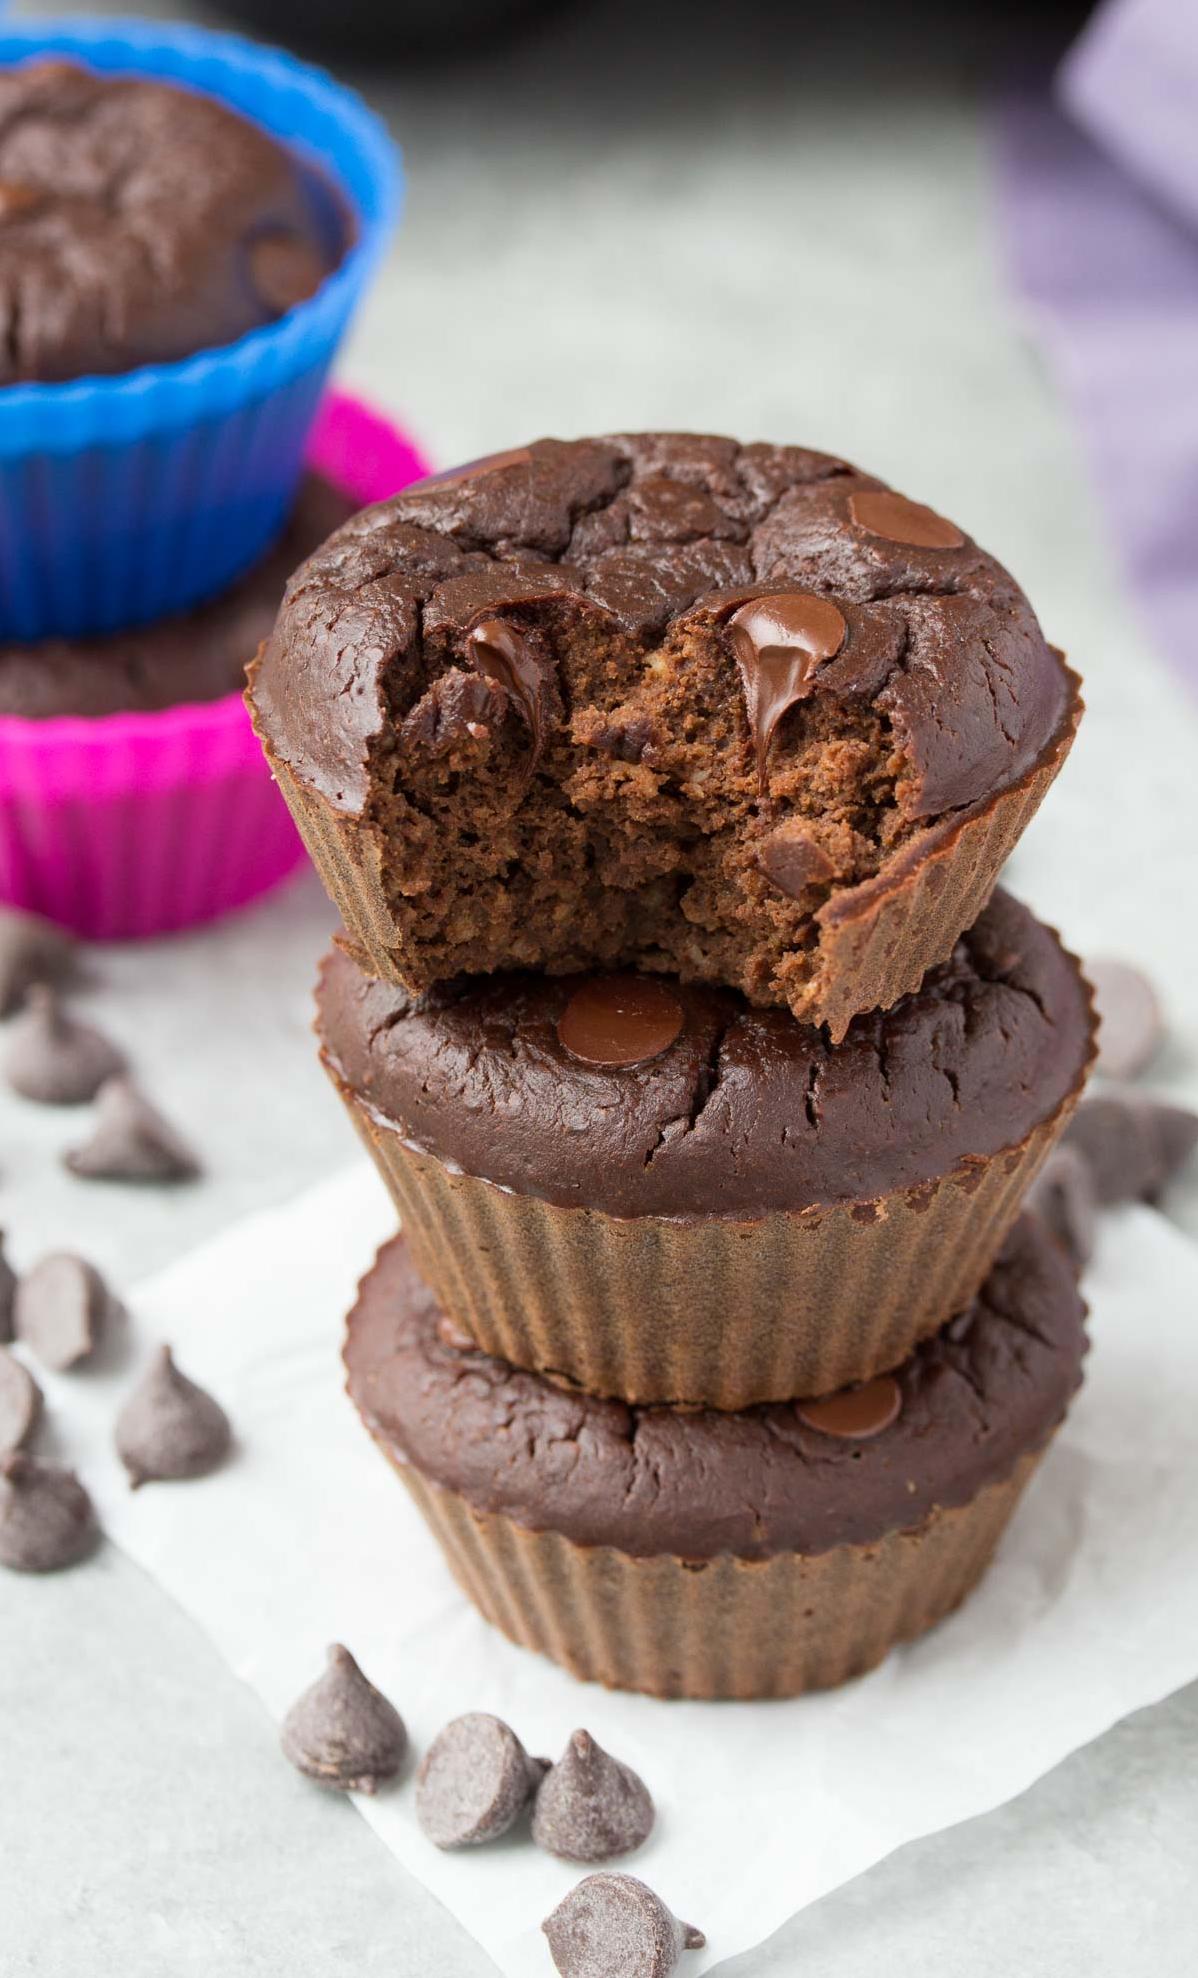  Let these muffins do the talking and impress your guests with their deliciousness.